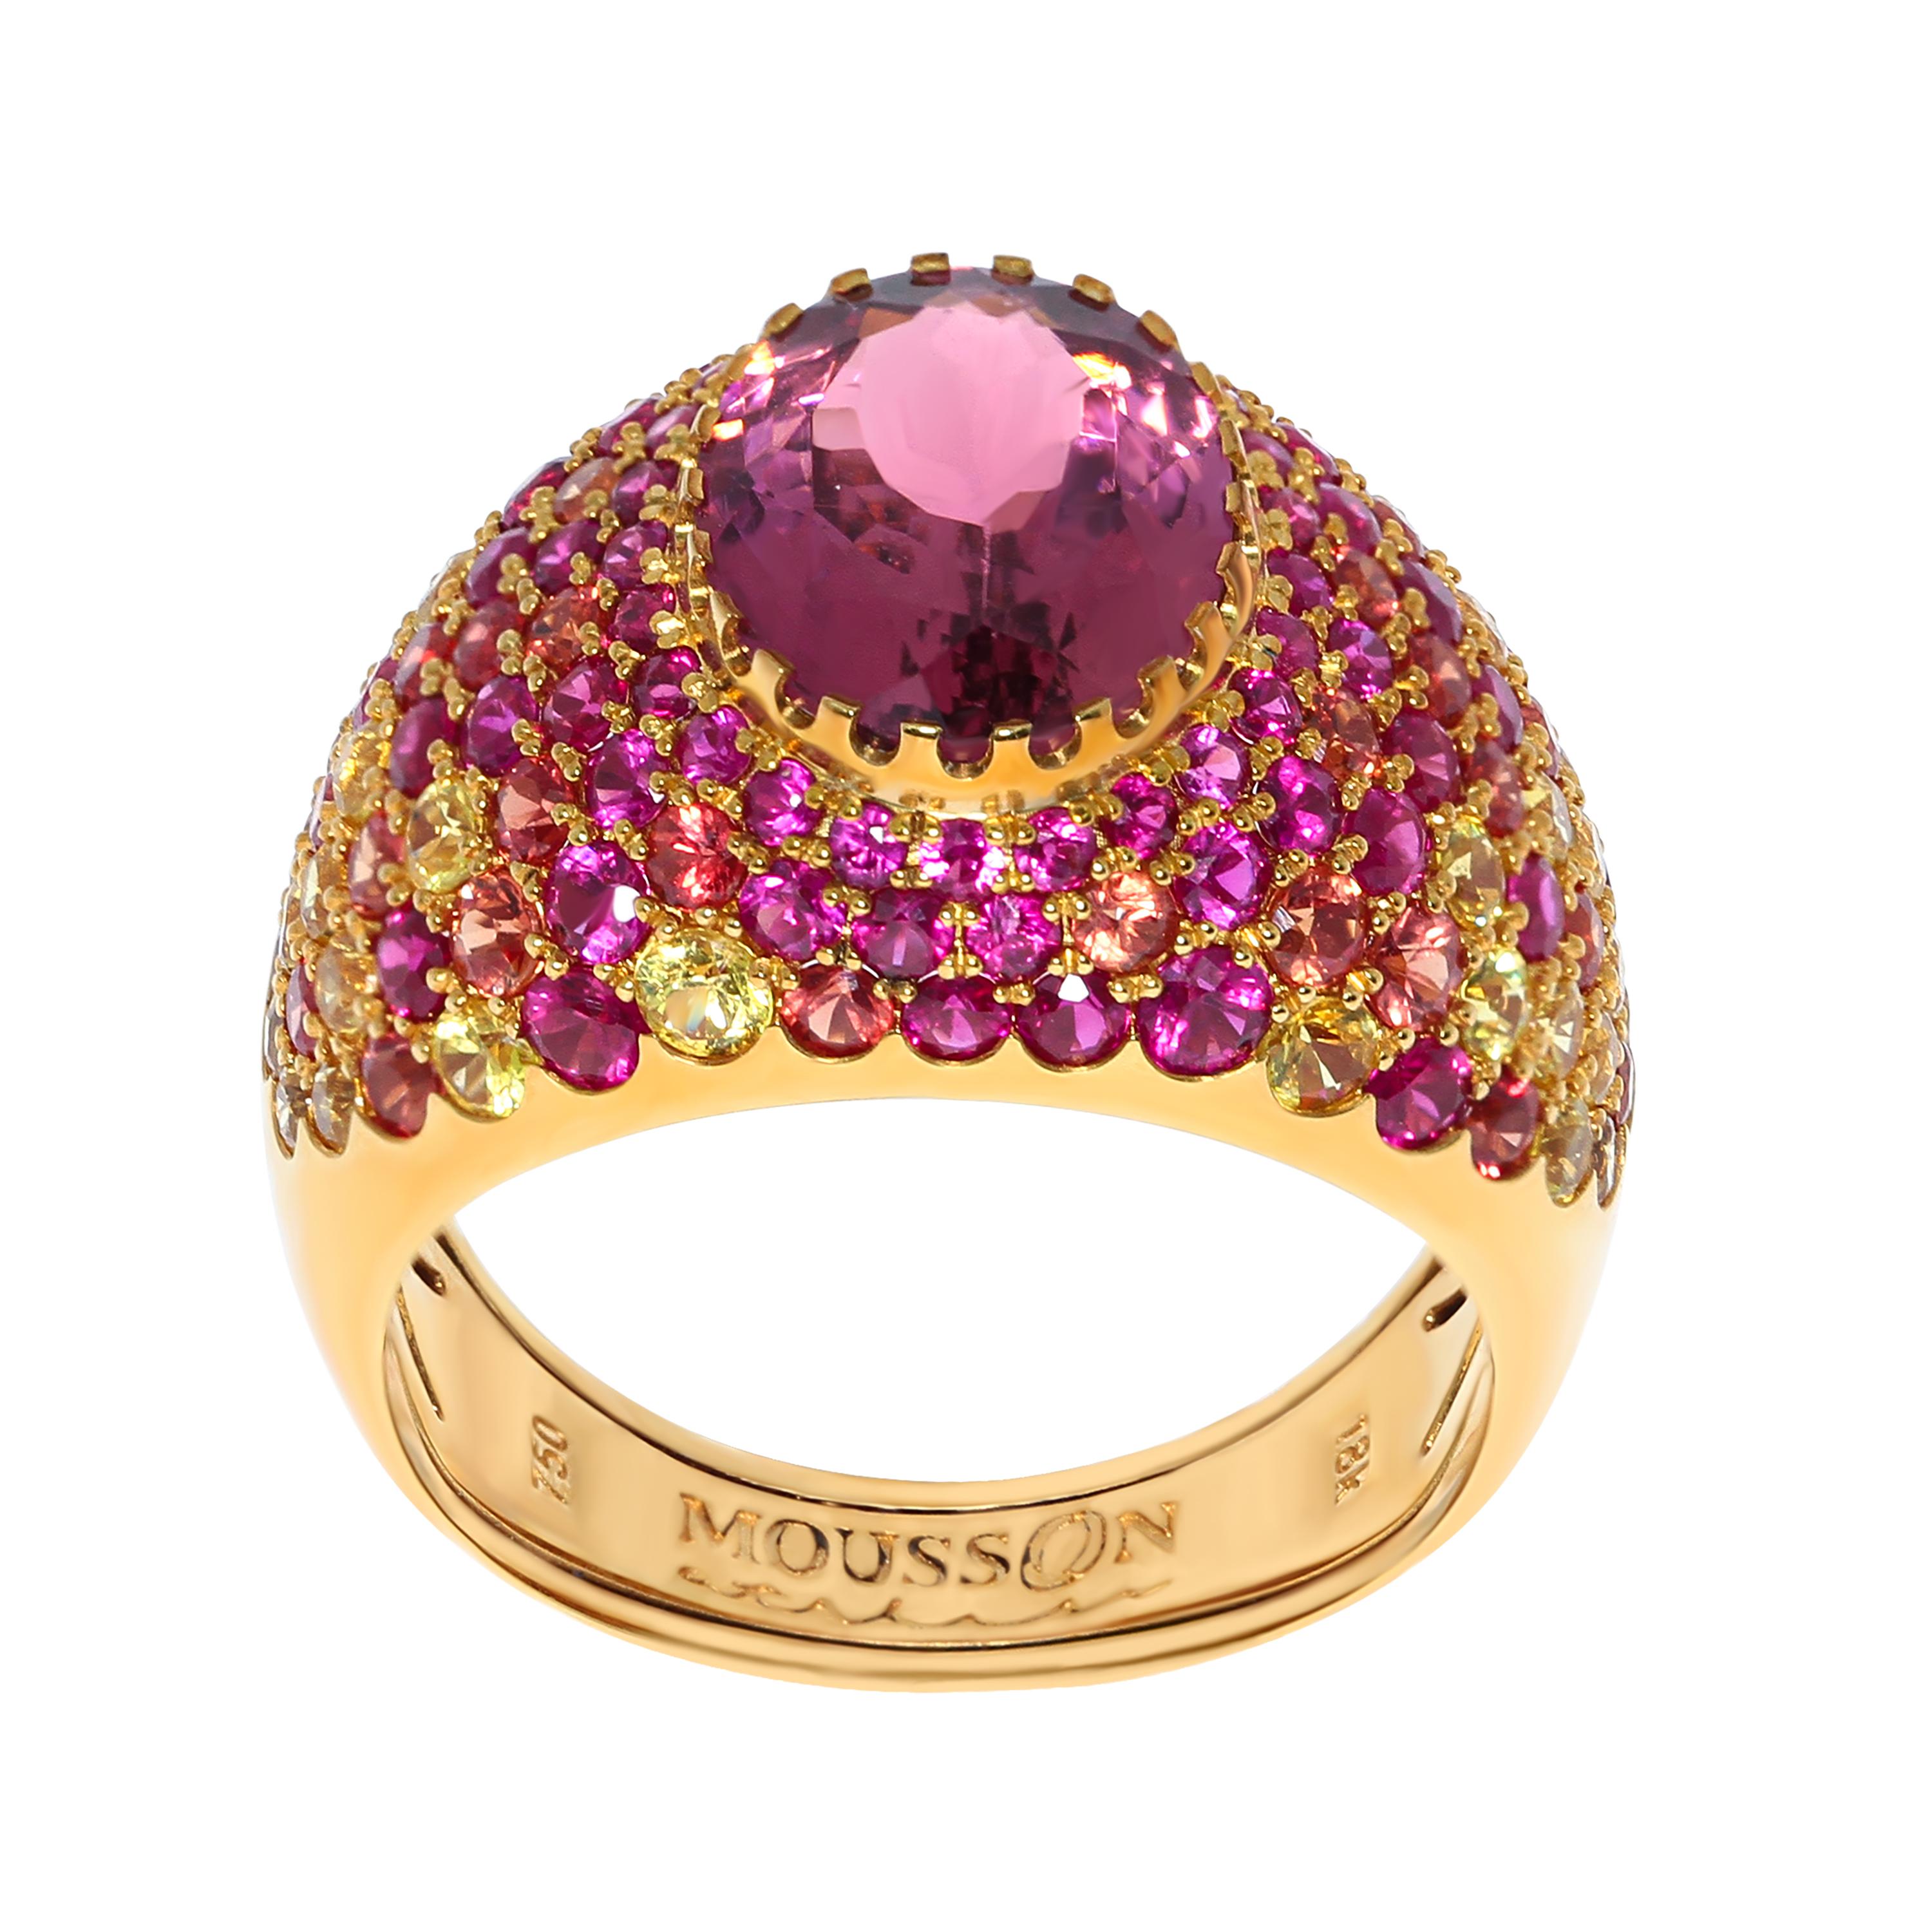 Pink Tourmaline 2.32 Carat Rubies Sapphires Yellow 18 Karat Gold Riviera Ring
The name and the variety of colours in this collection are associated with the bright Italian and French Riviera, vivid and colourful houses and sun reflections on the